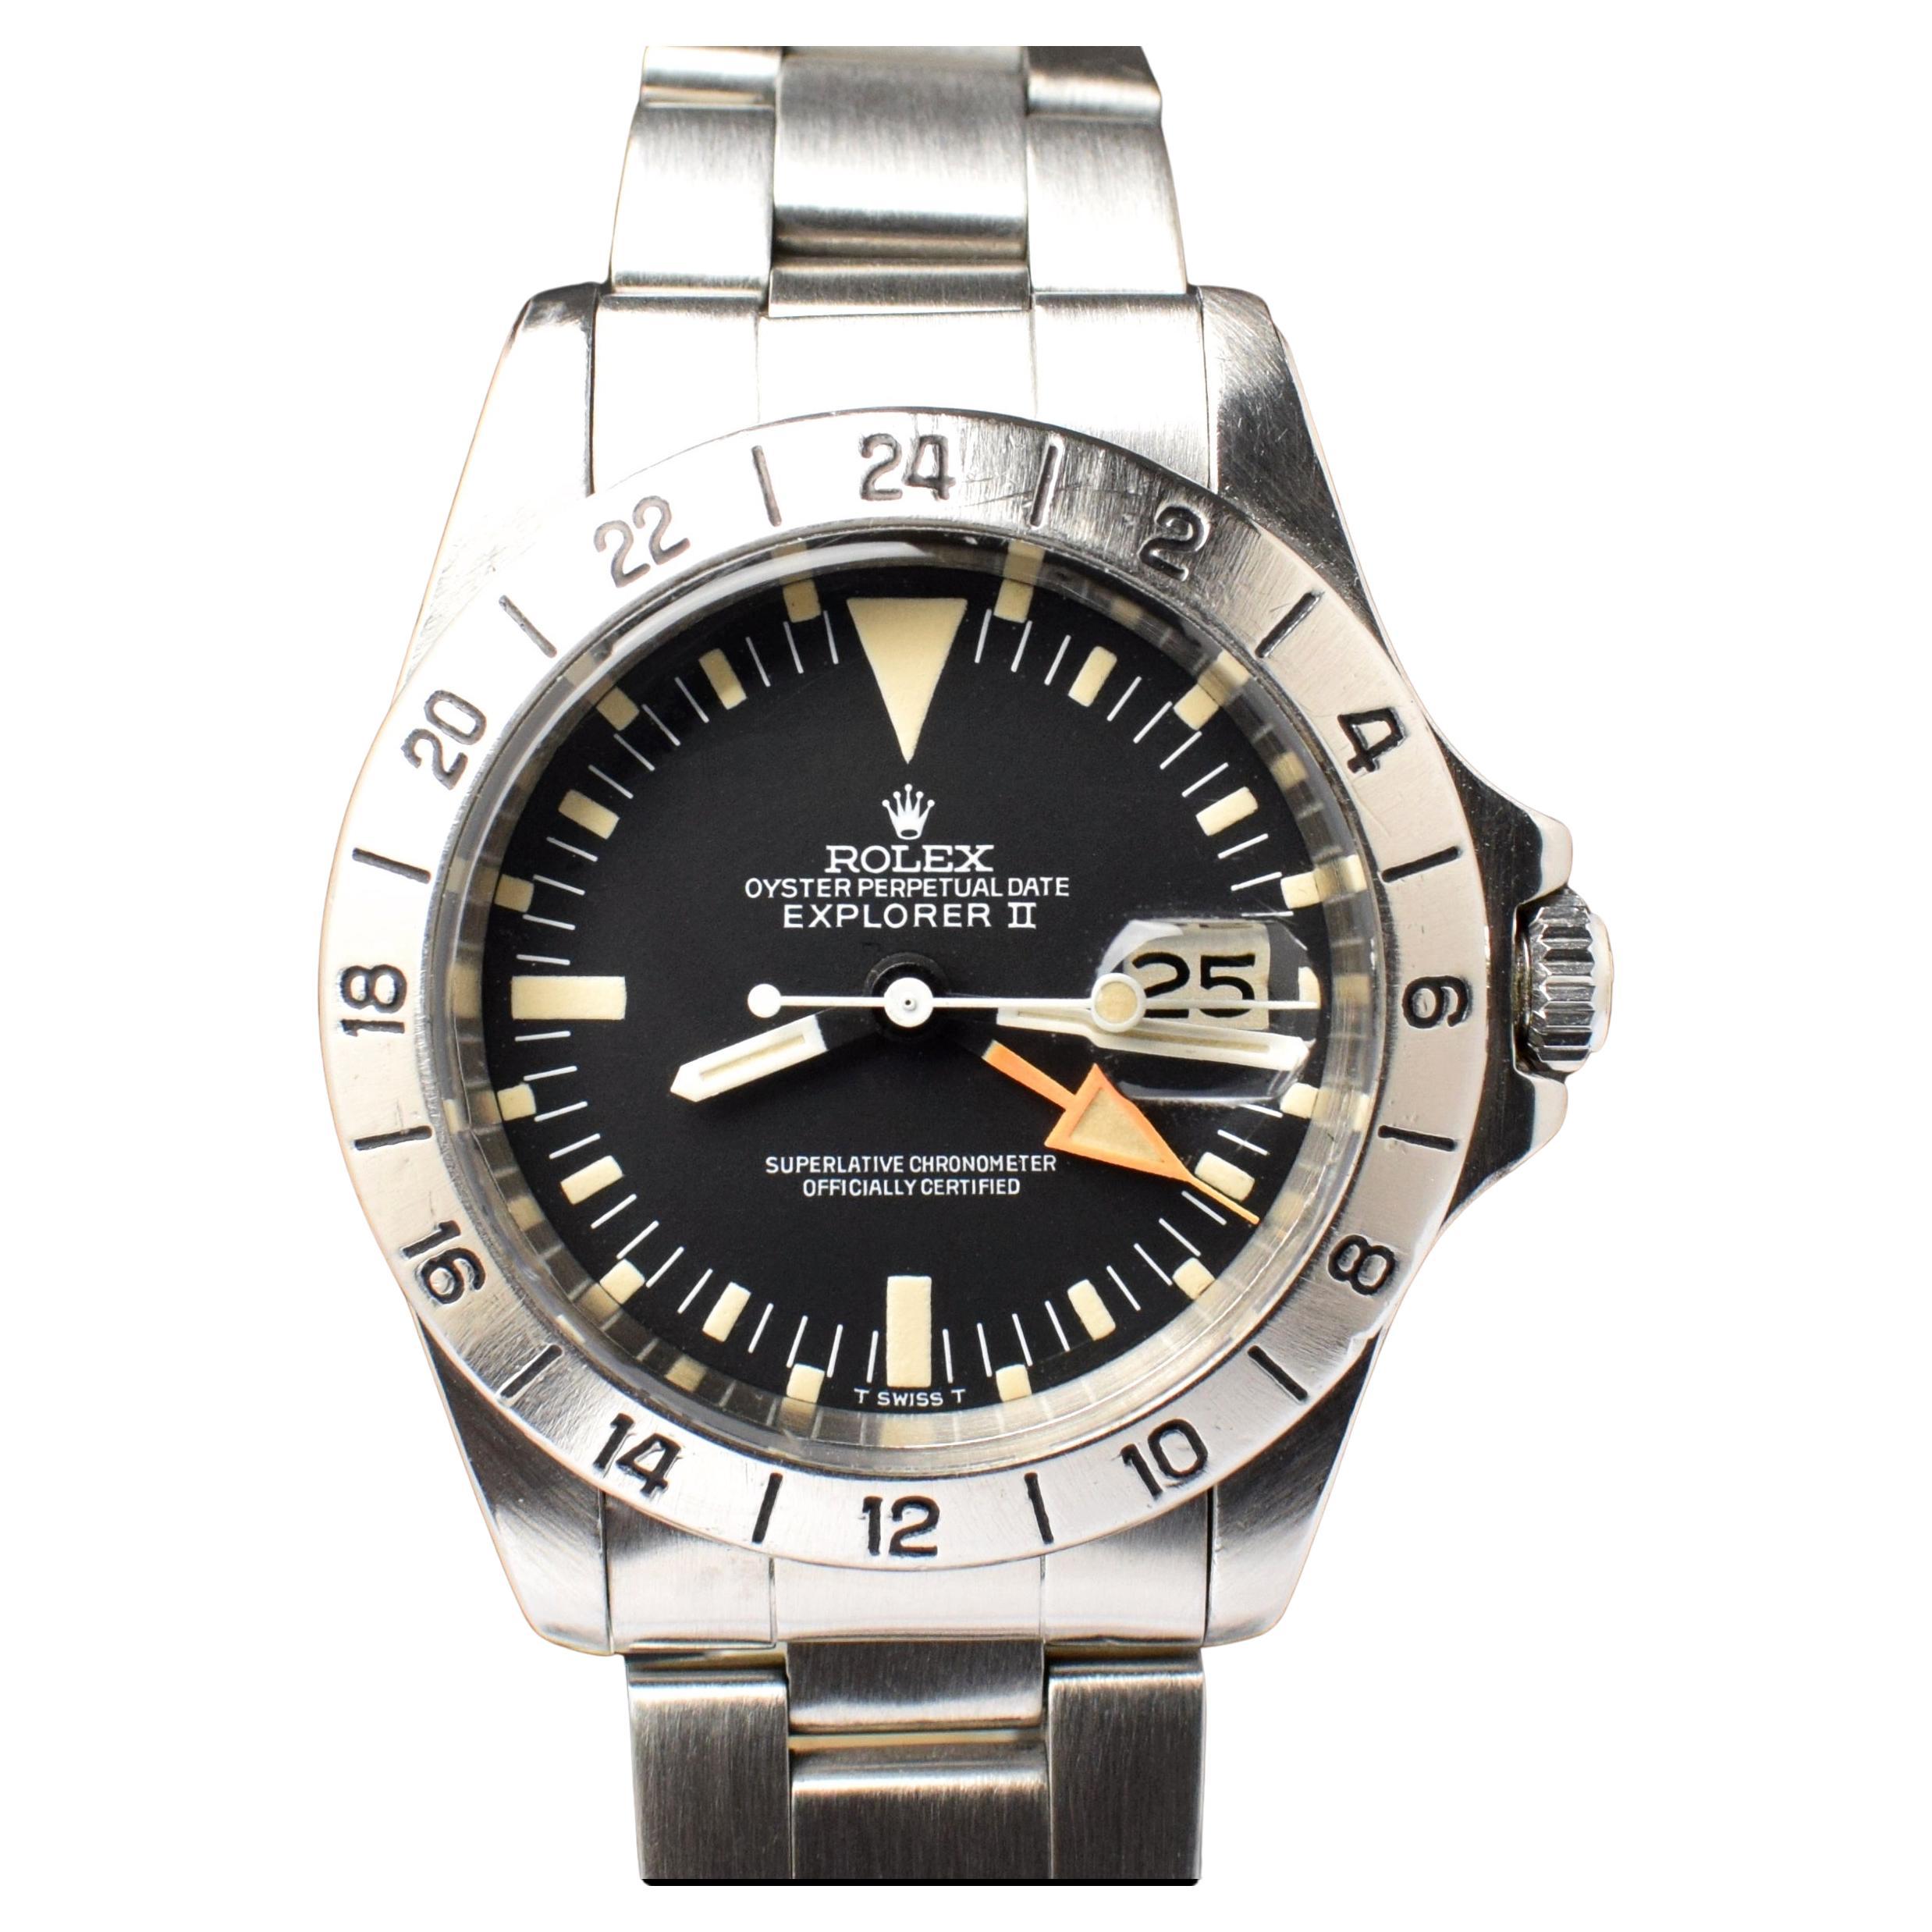 Rolex Oyster Perpetual Date Explorer II 1655 Steel Automatic Watch, 1972 For Sale